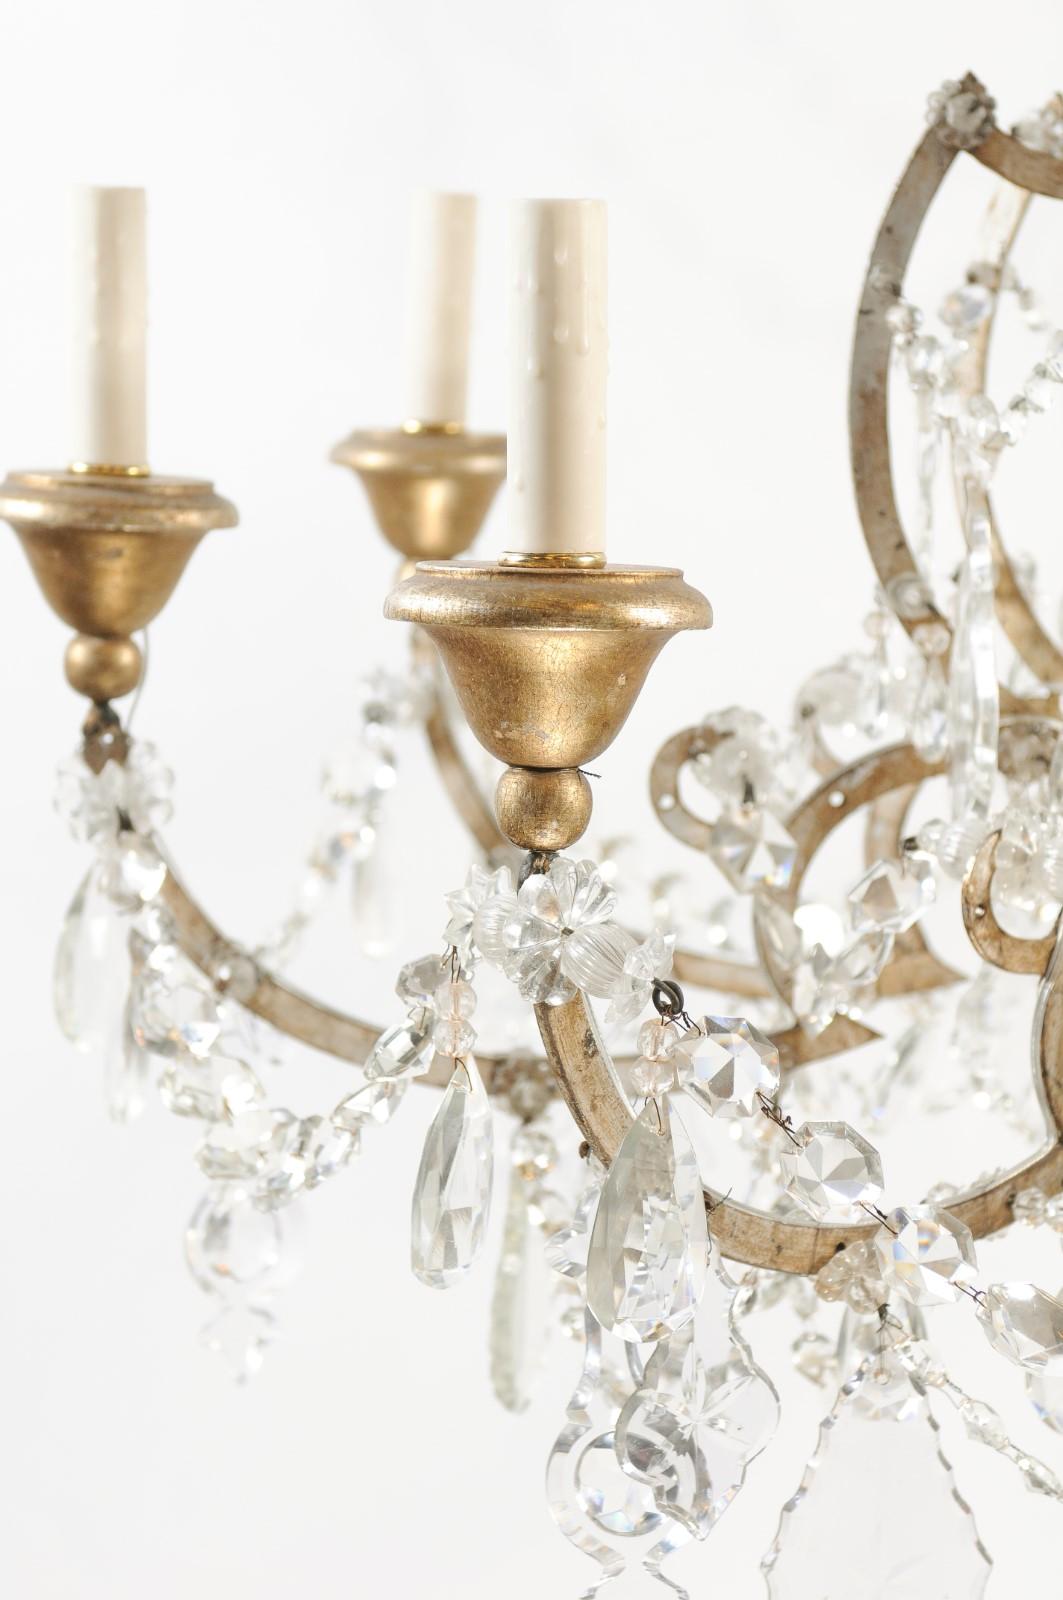 Italian Crystal & Silvered Wood Chandelier with 8 Lights, 19th Century For Sale 2